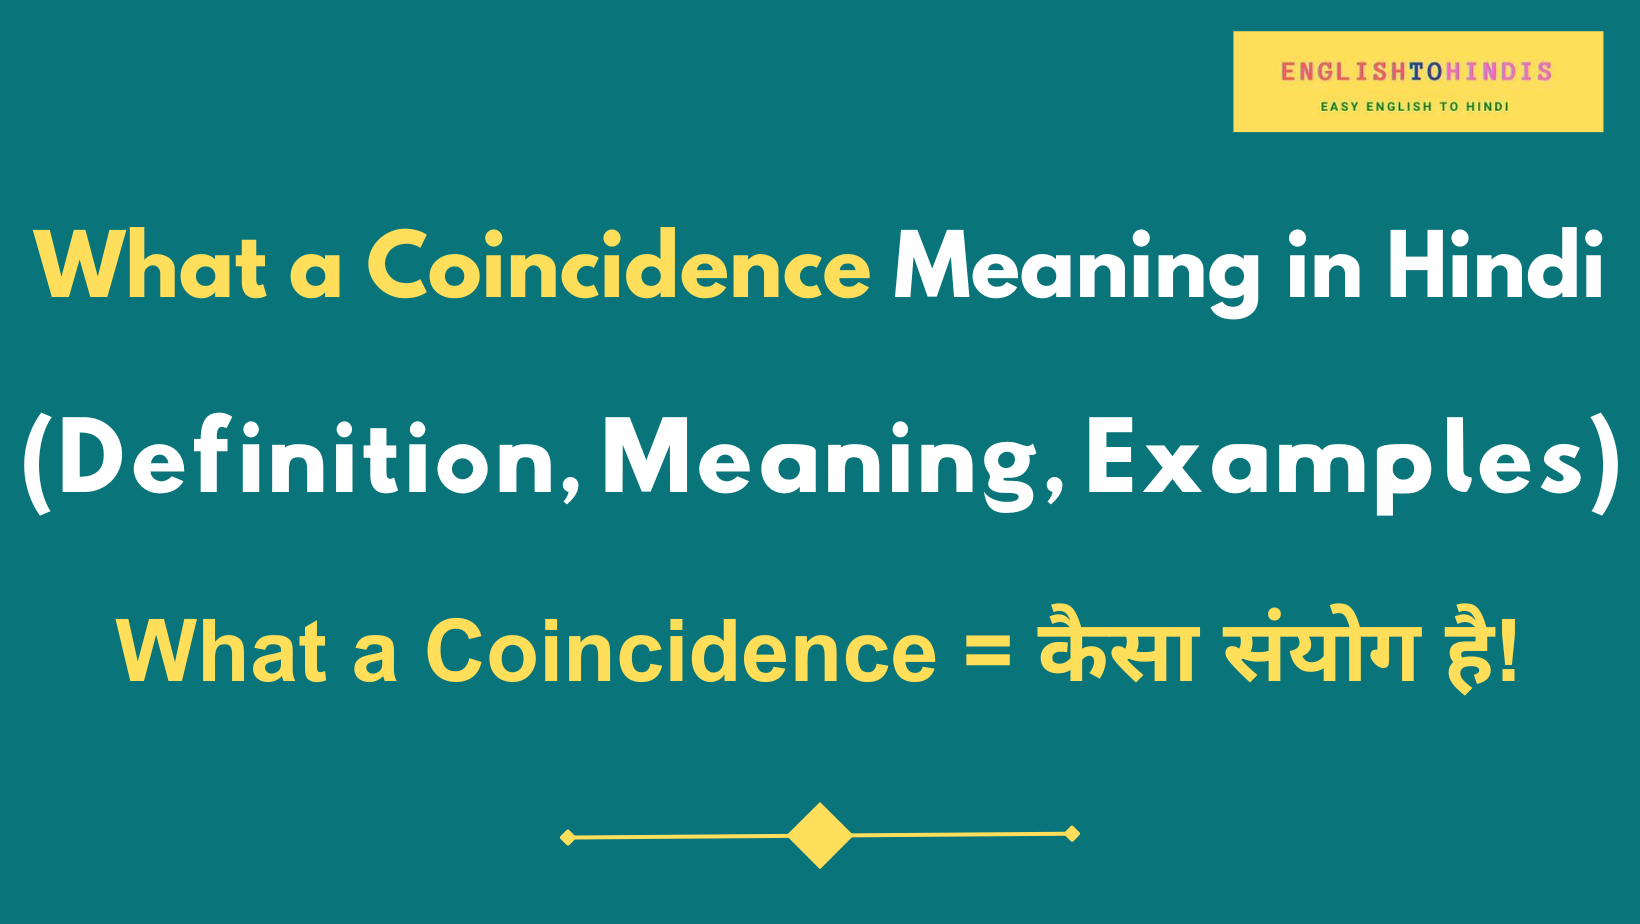 What a Coincidence Meaning in Hindi